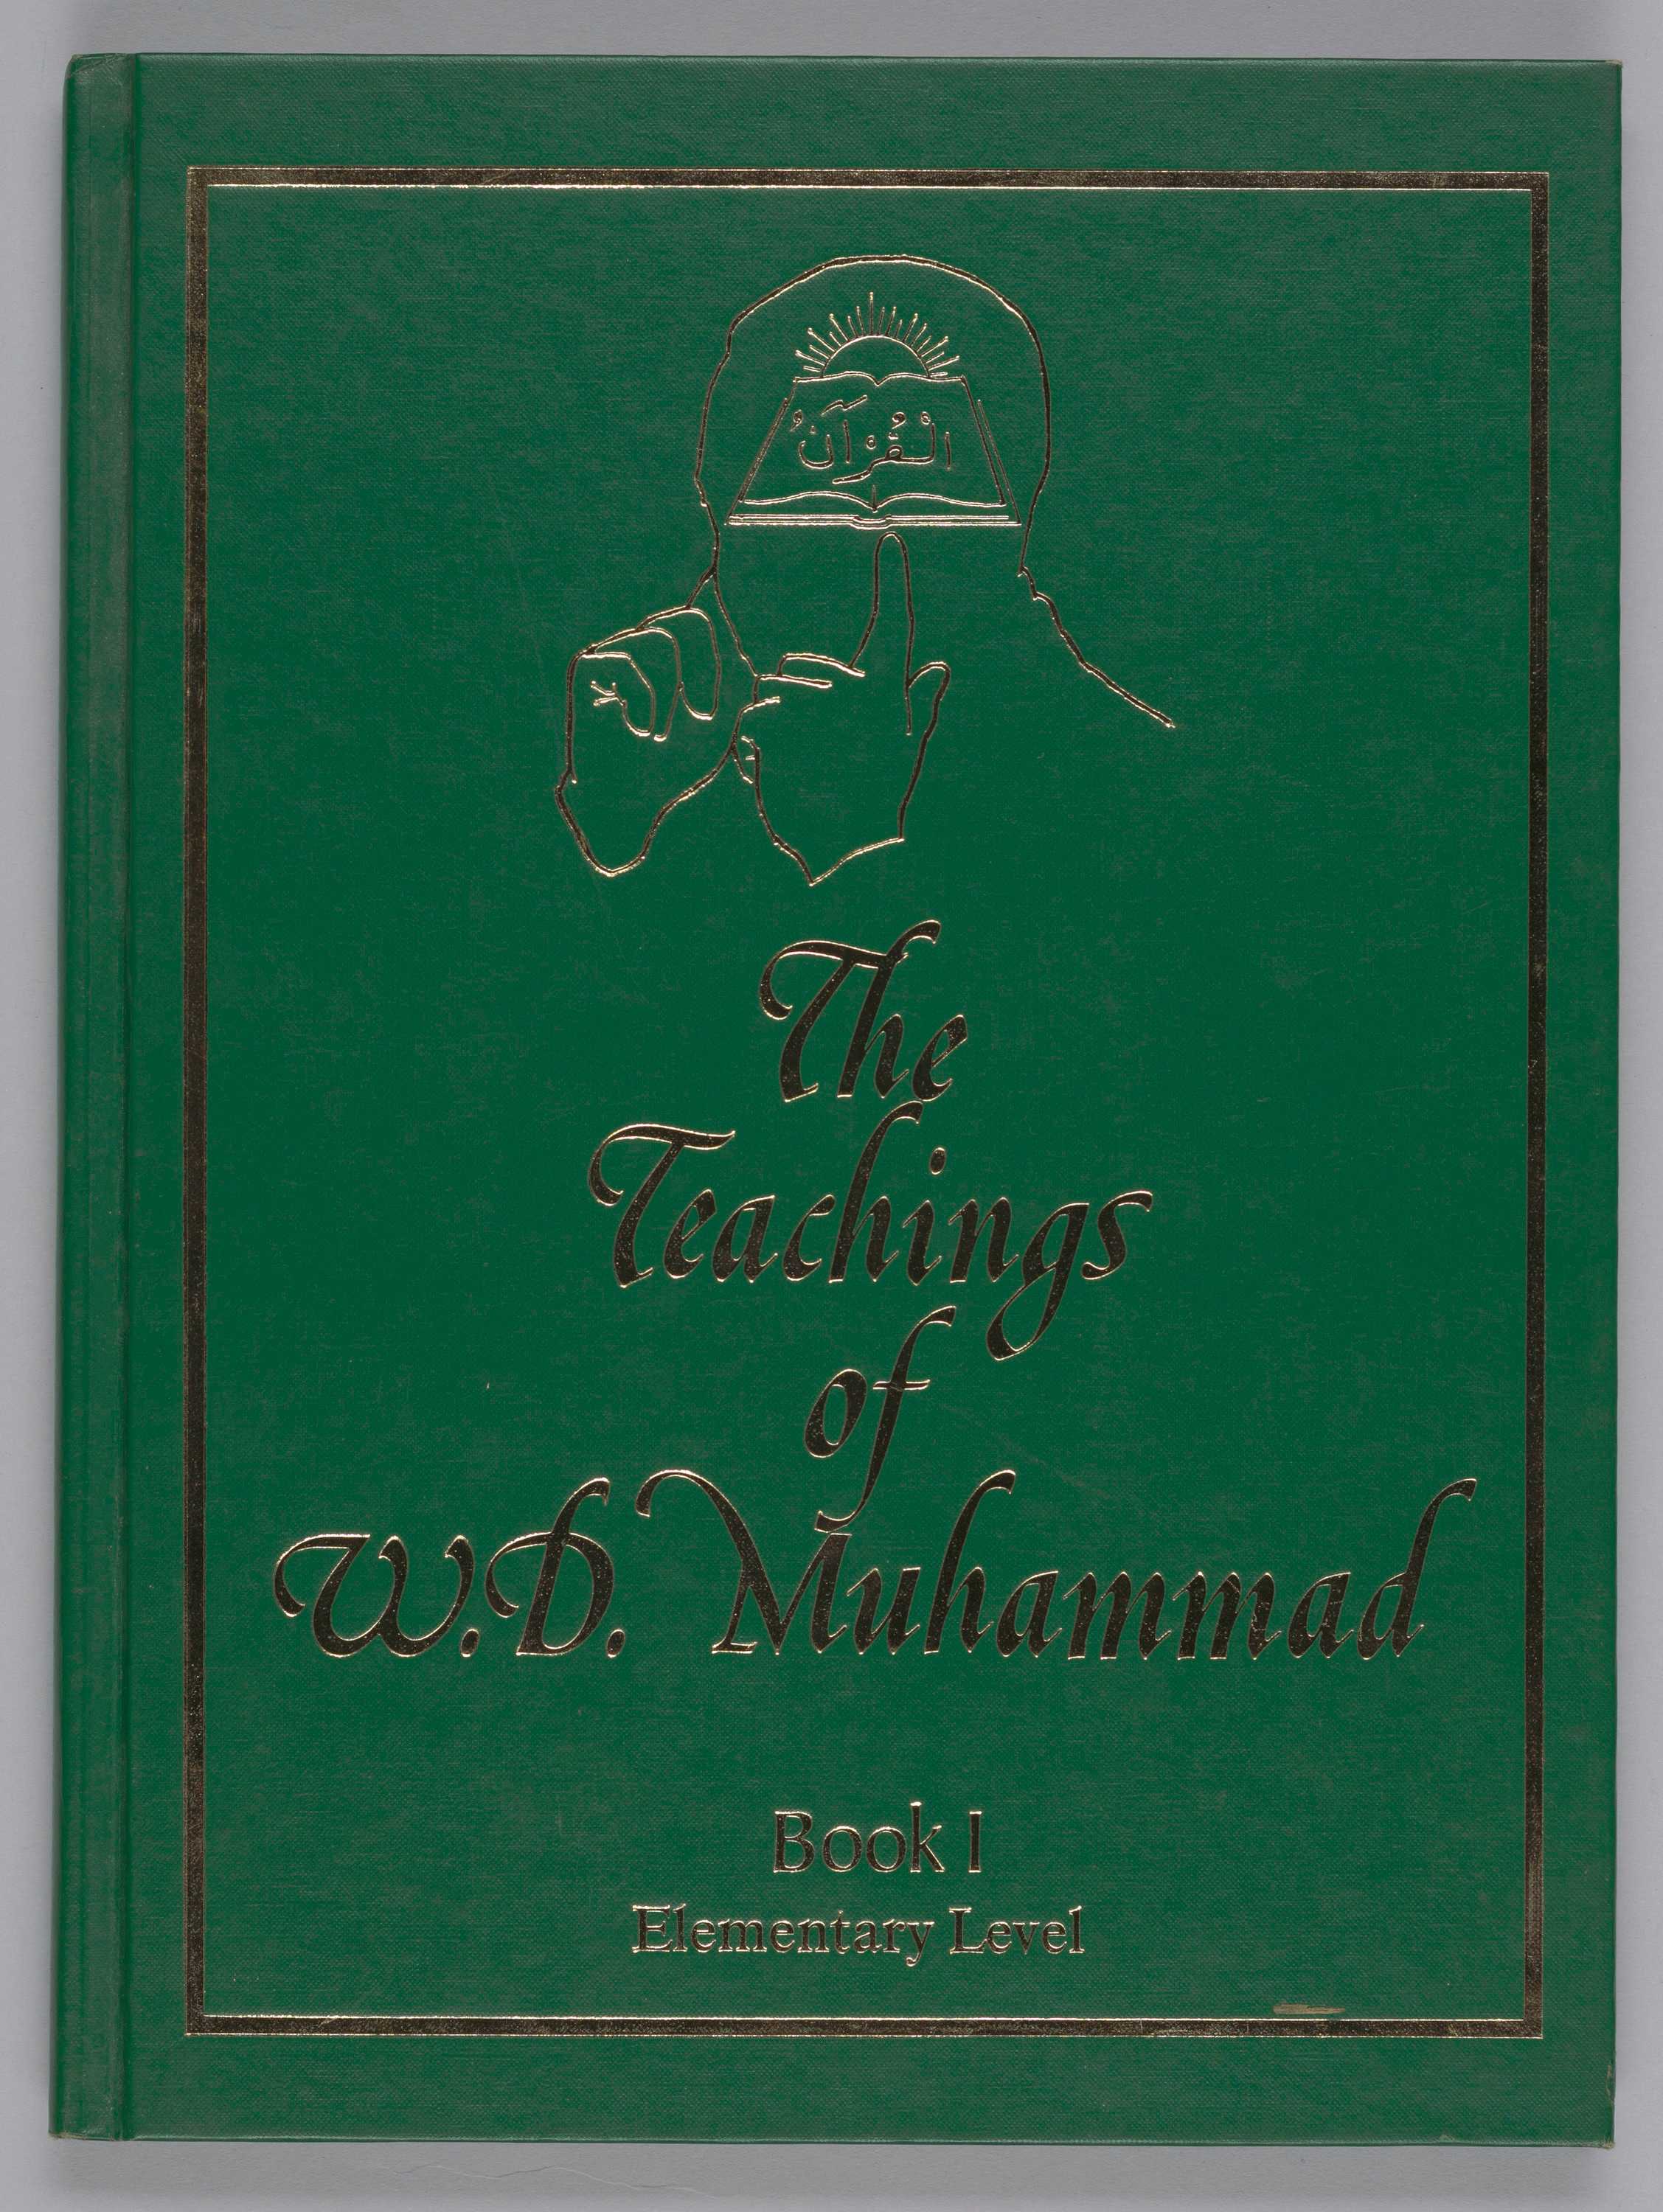 Two copies of Teachings of W.D. Muhammad: Book 1 Elementary Level.